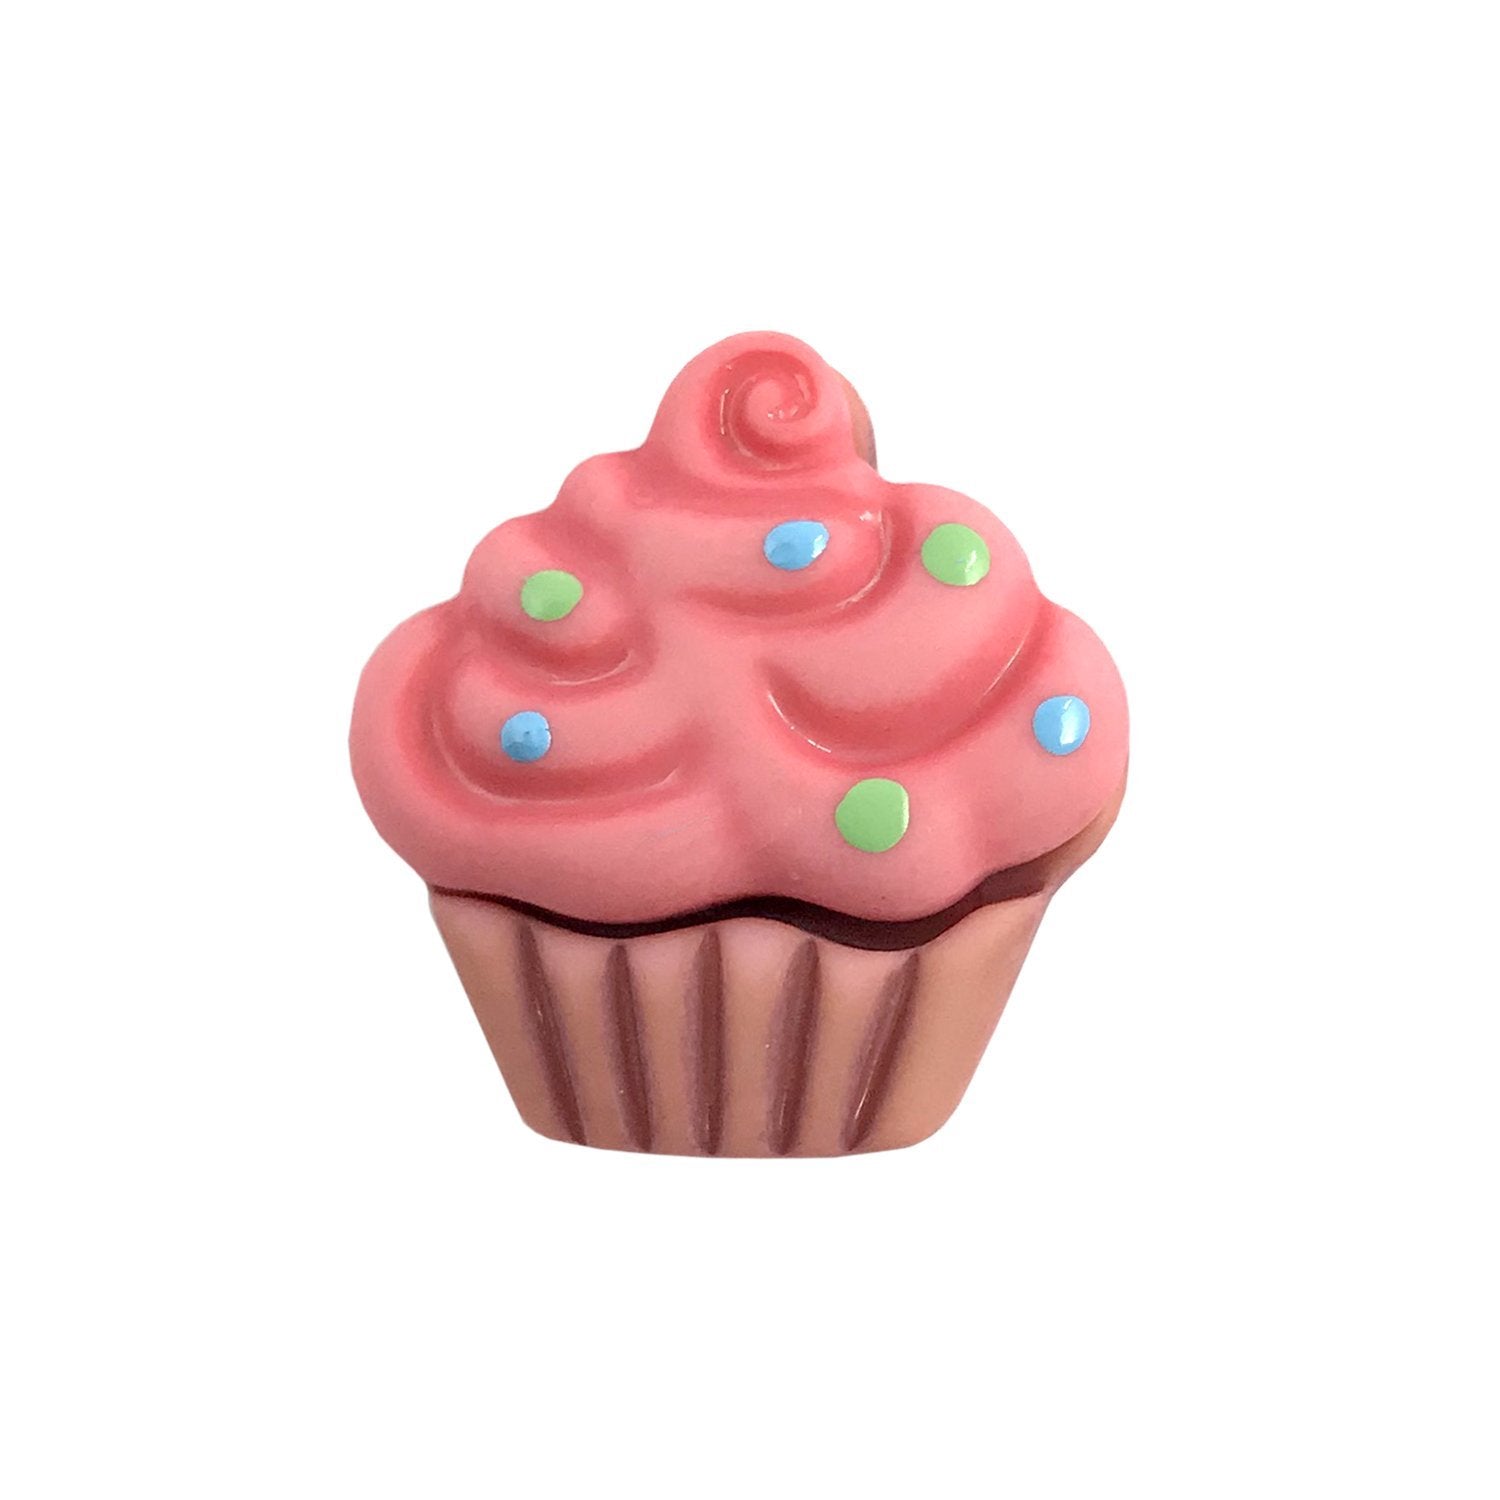 Cupcake w Sprinkles - B1032 - Buttons Galore and More